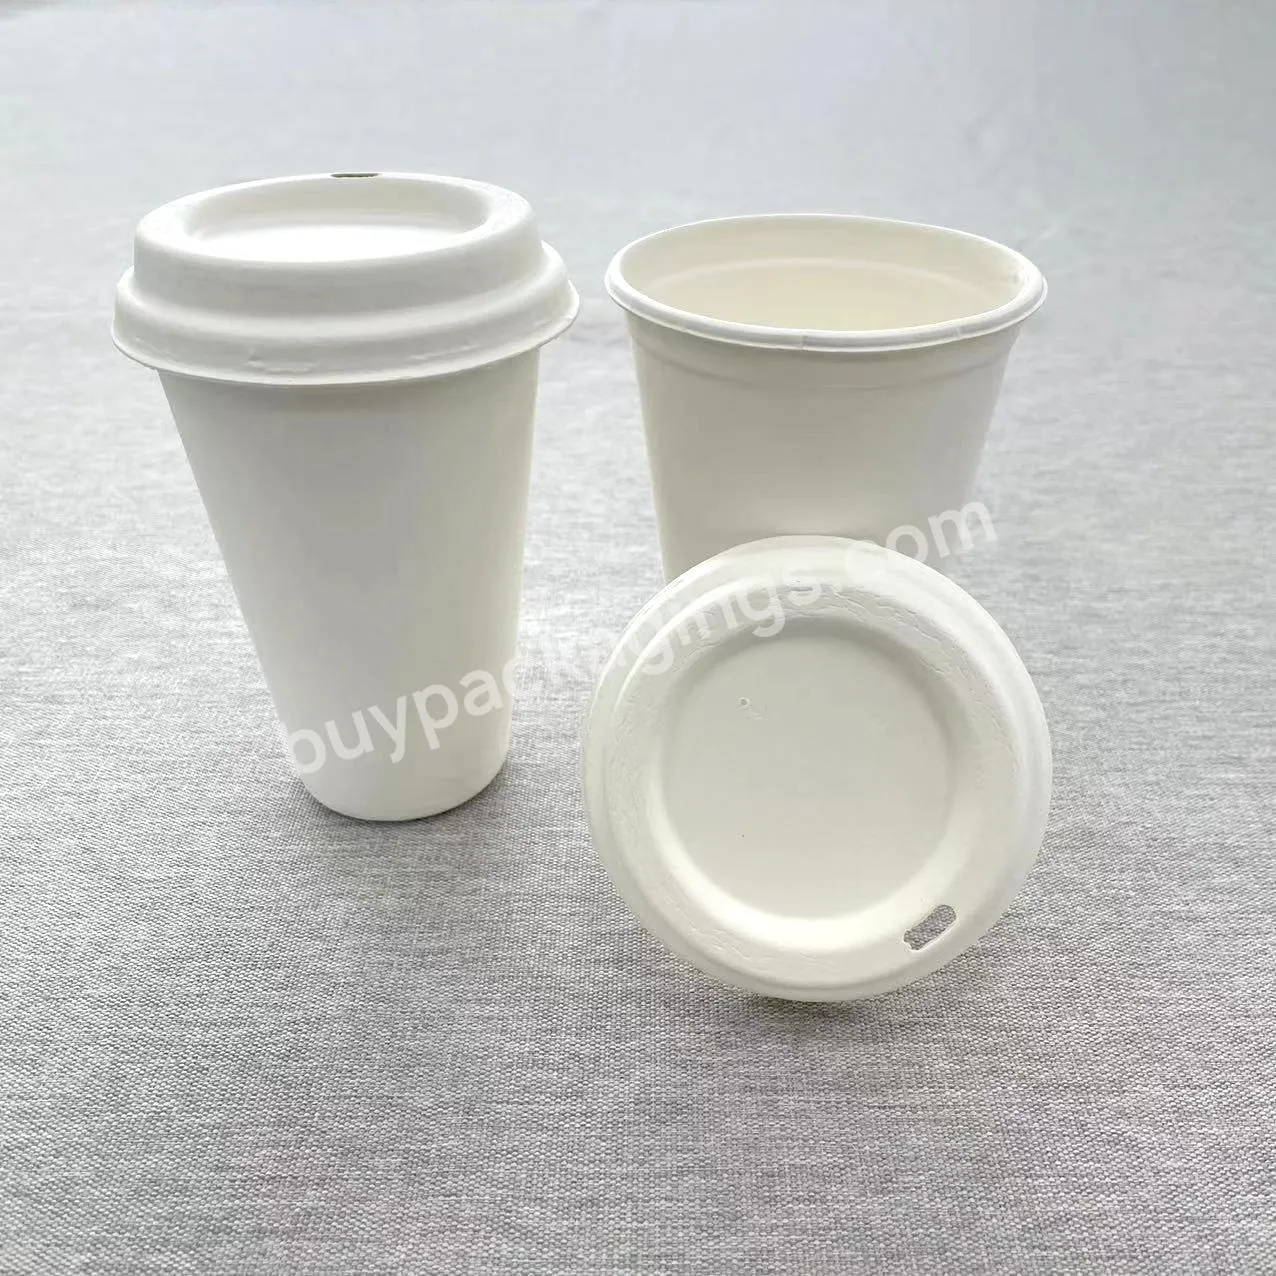 Biodegradable Disposable Sugarcane 450ml Tea Coffee Premium Hot Drinks Paper Cups With Pulp Lid - Buy Coffee Paper Cup Lids,Disposable Tea Coffee Hot Drinks Paper Cups,Premium Hot Drink Paper Cups.